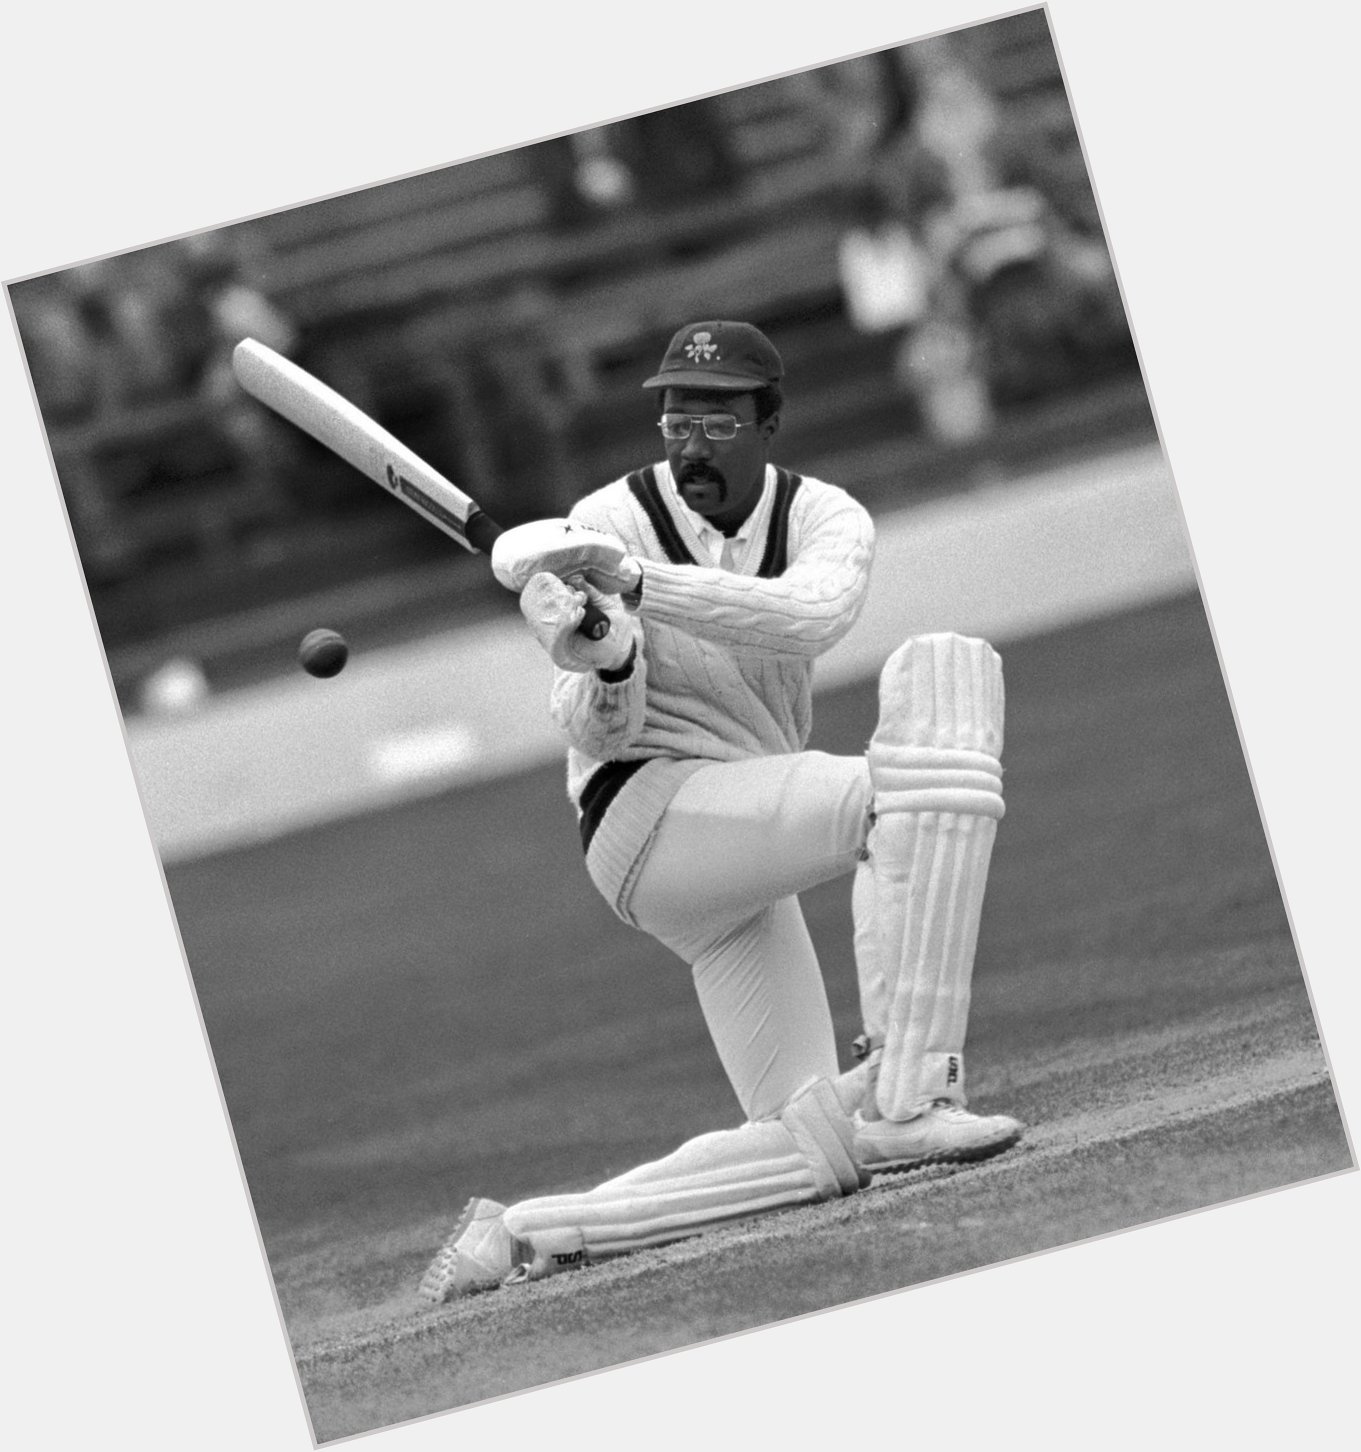 Happy birthday to Hall of Fame inductee, Clive Lloyd CBE!     